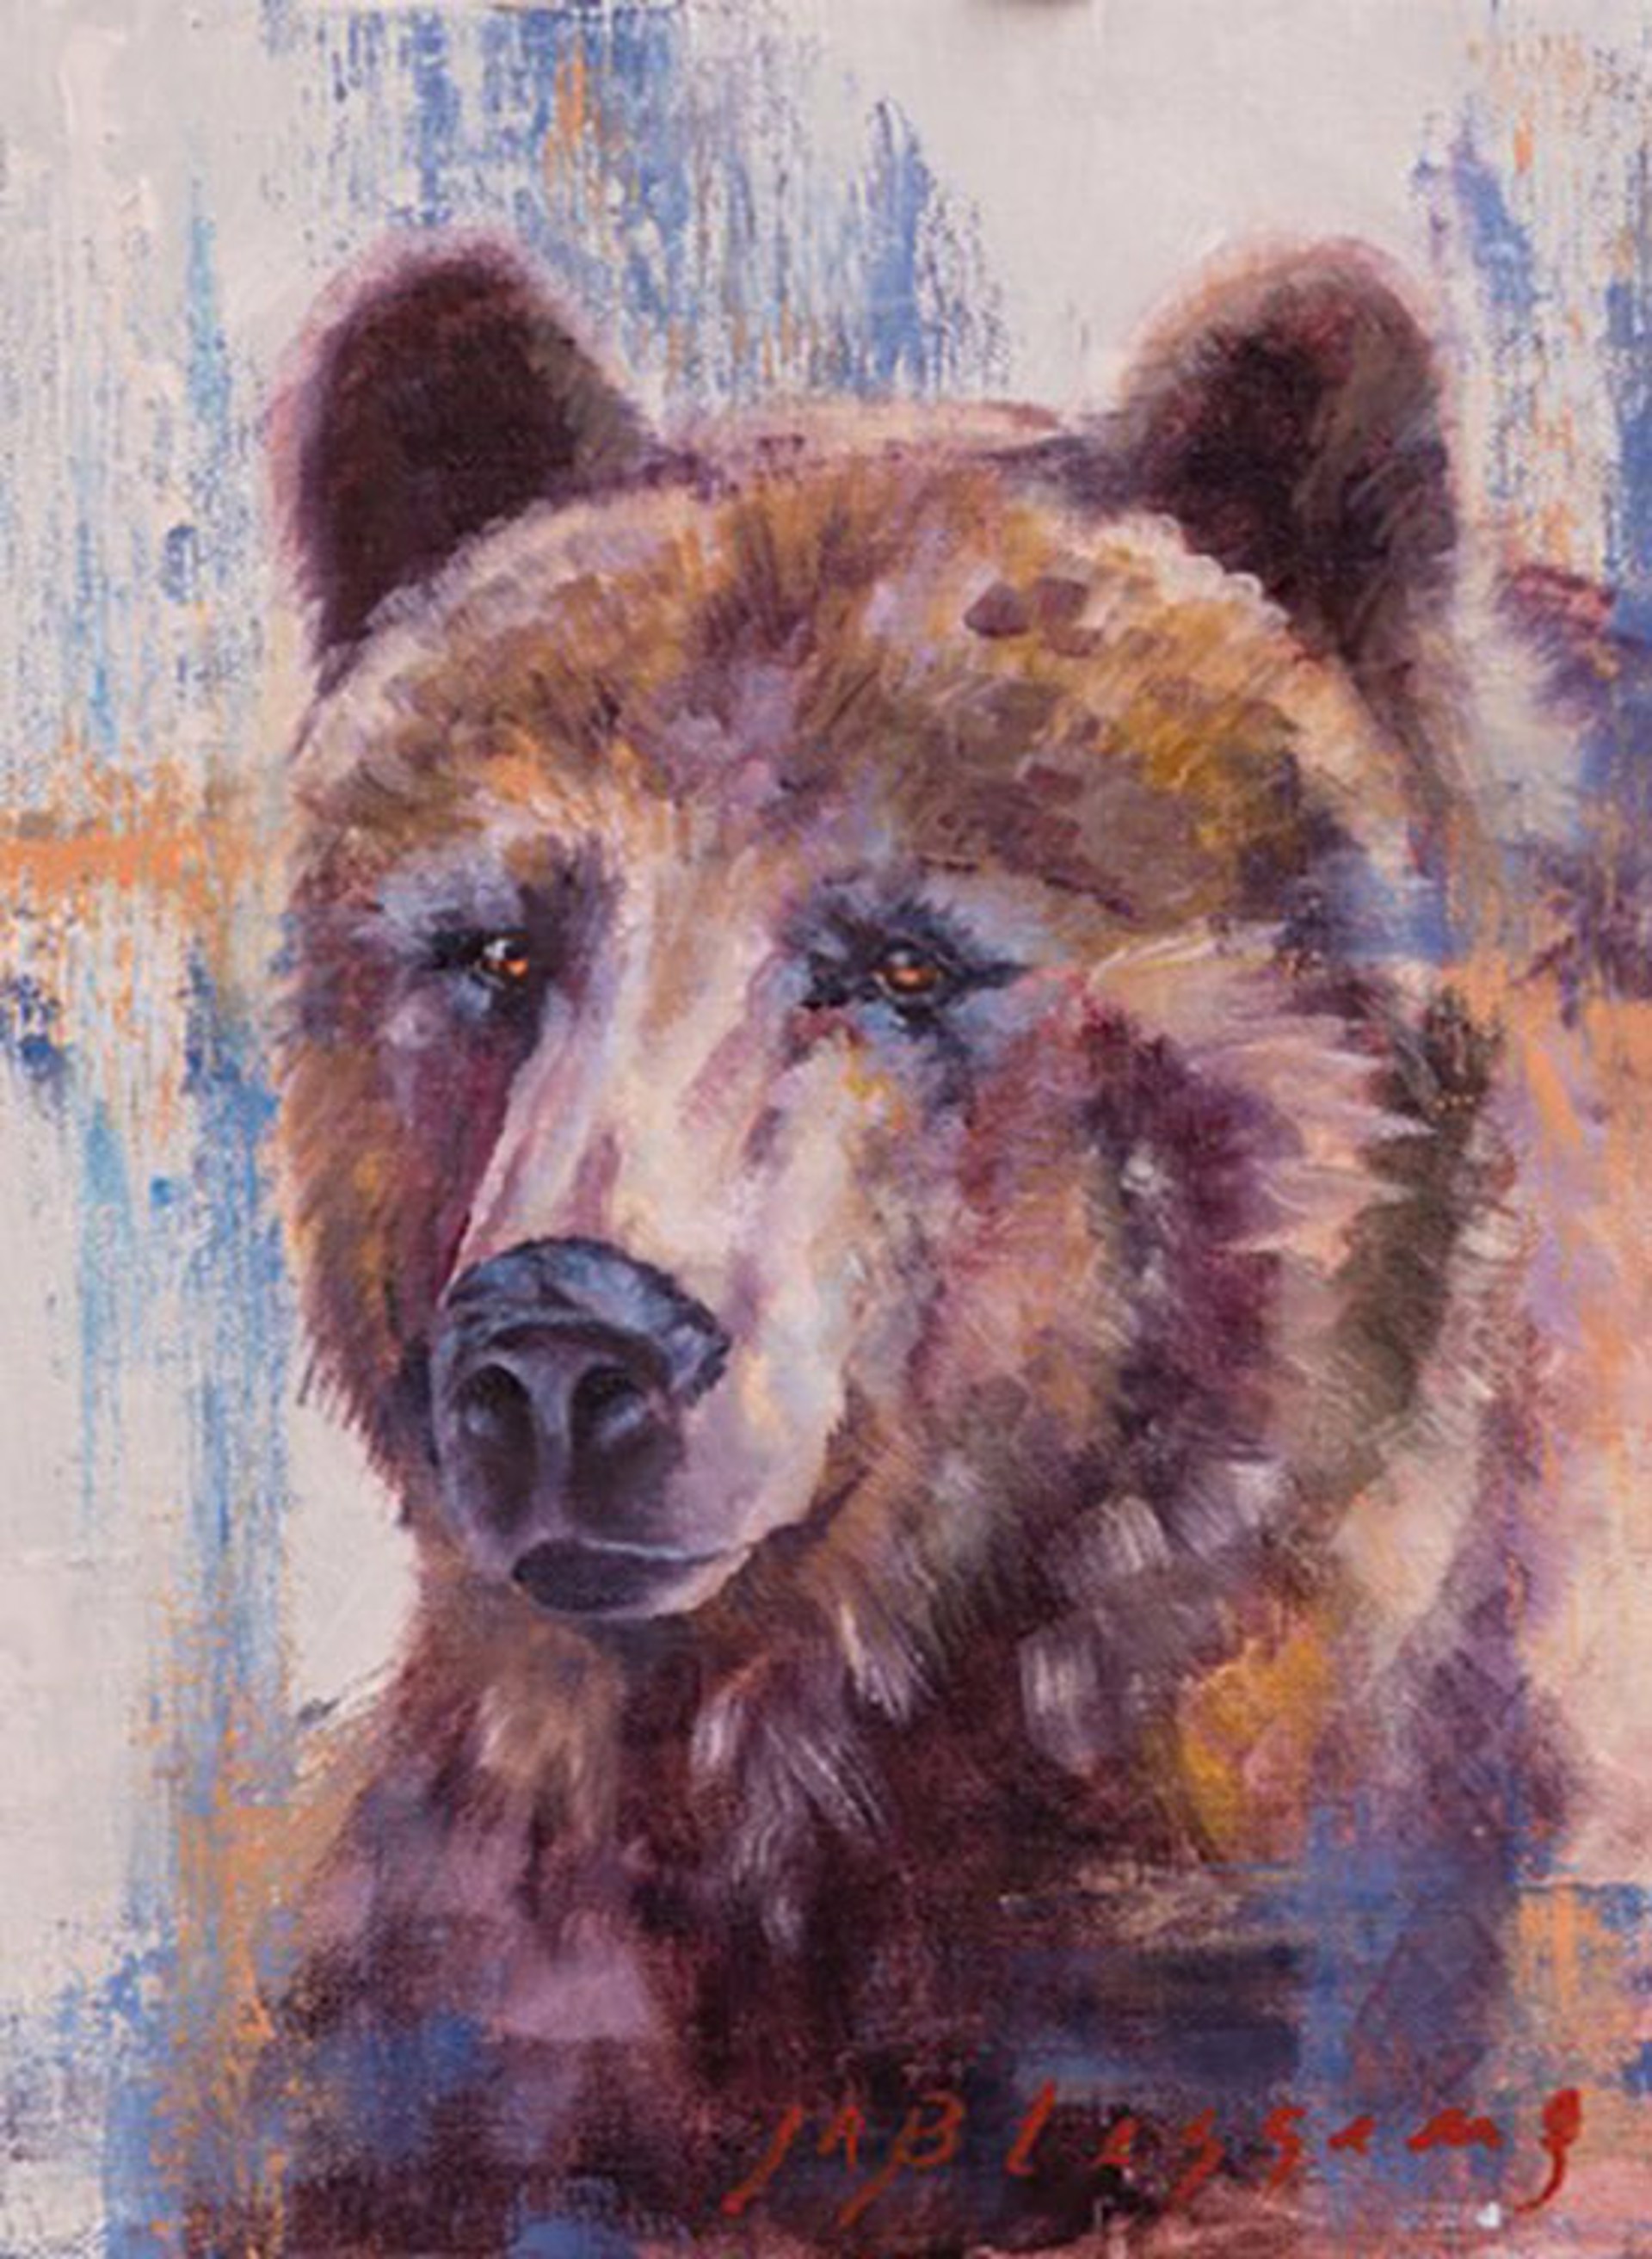 Original Oil Painting Featuring A Grizzly Bear Portrait On Blue And Gray Abstract Background